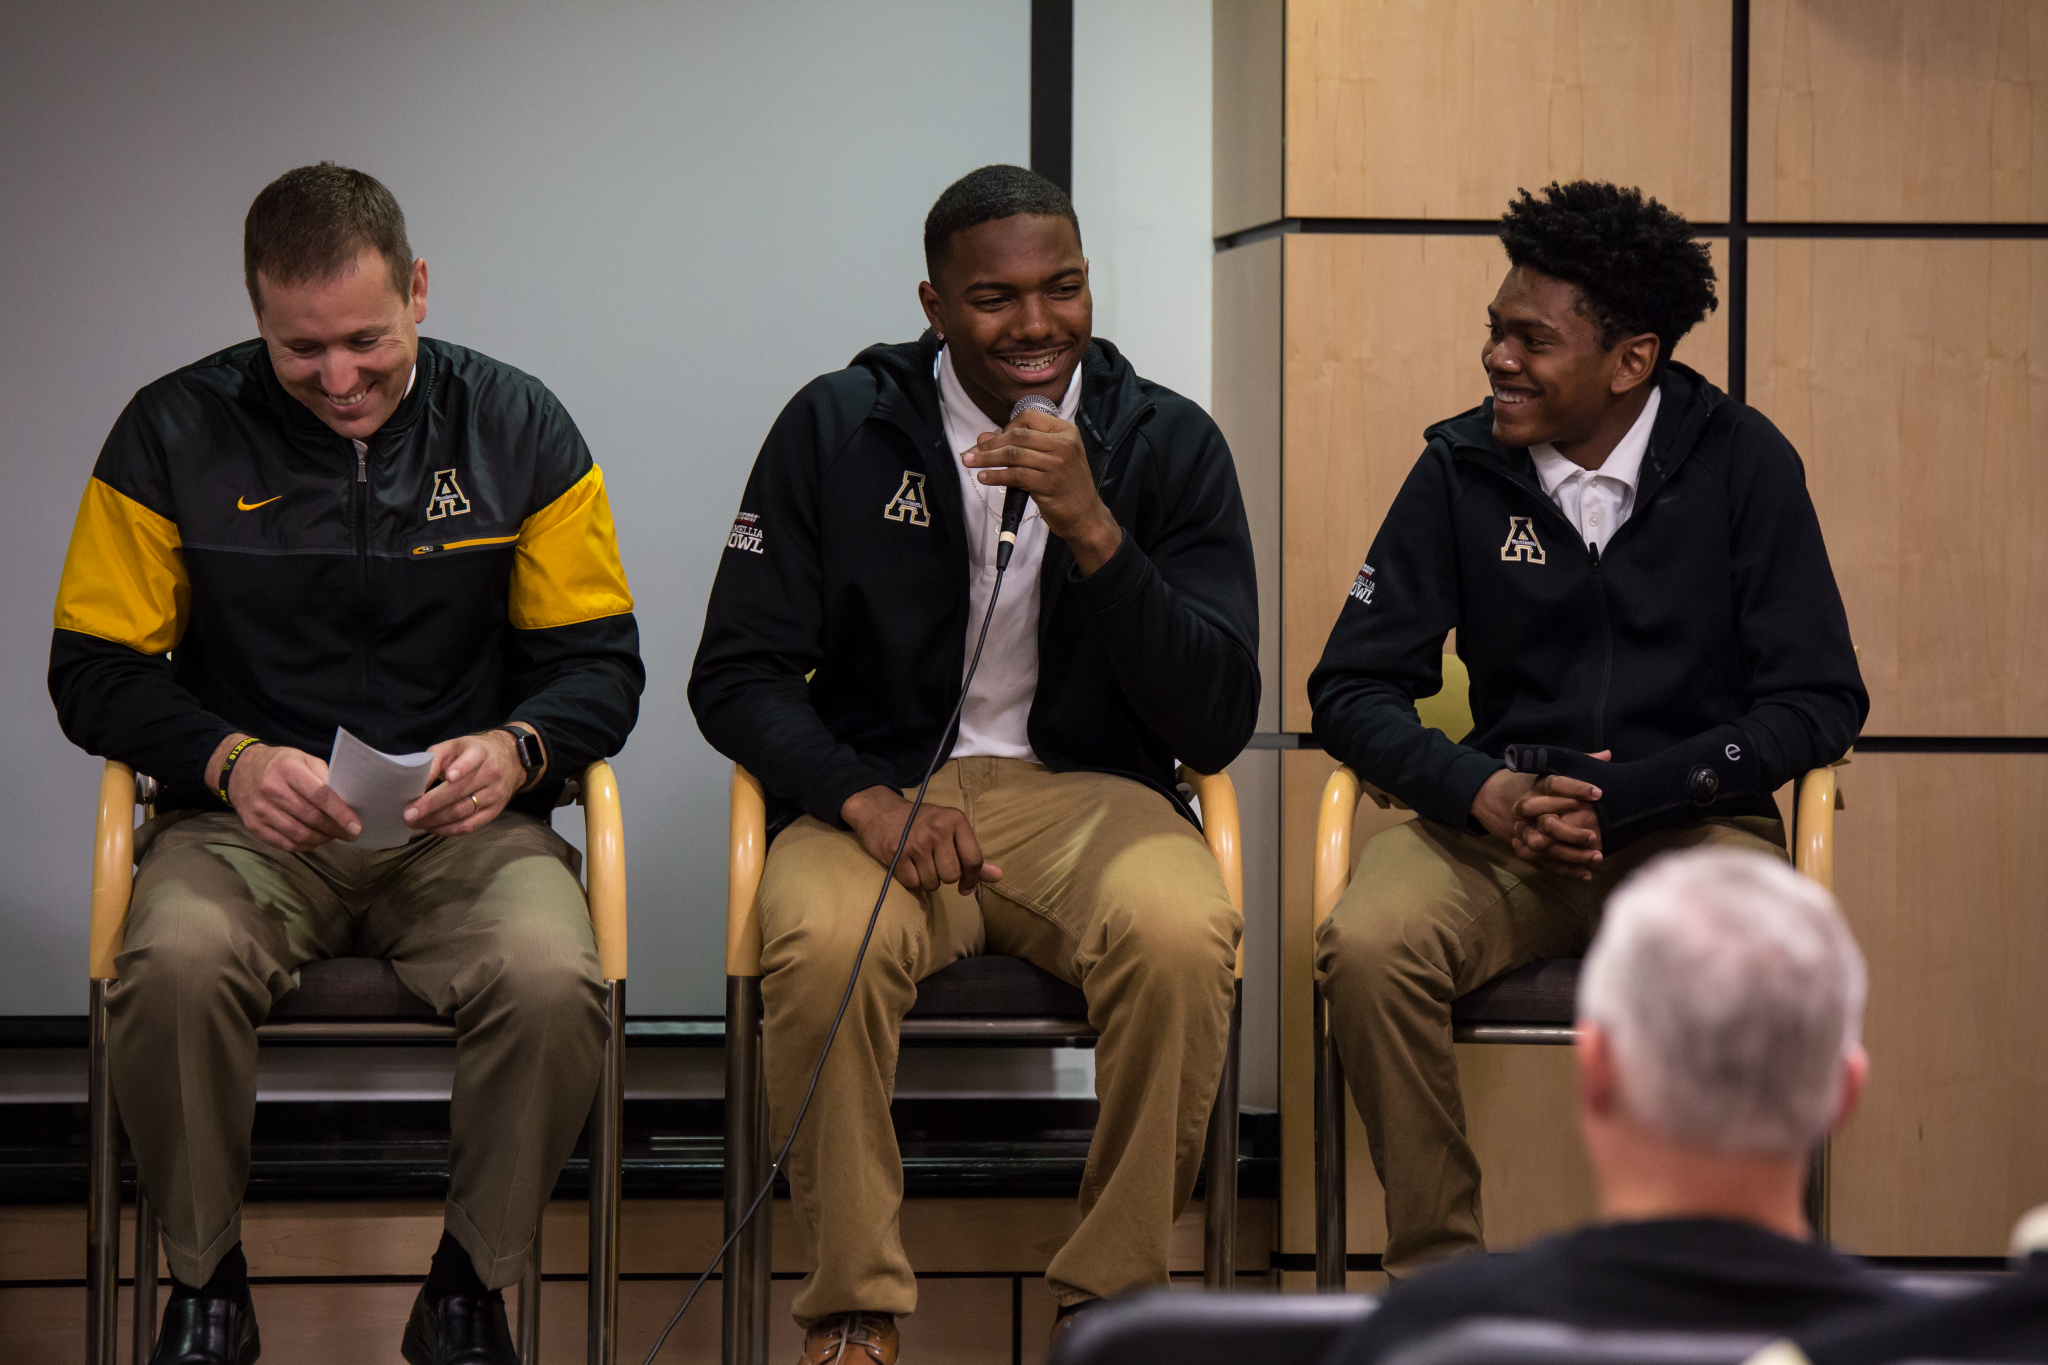 Football+recruit+Jermaine+McDaniel+discusses+what+attracted+him+to+Appalachian+State%2C+as+well+as+what+he+hopes+to+bring+to+the+football+program.+